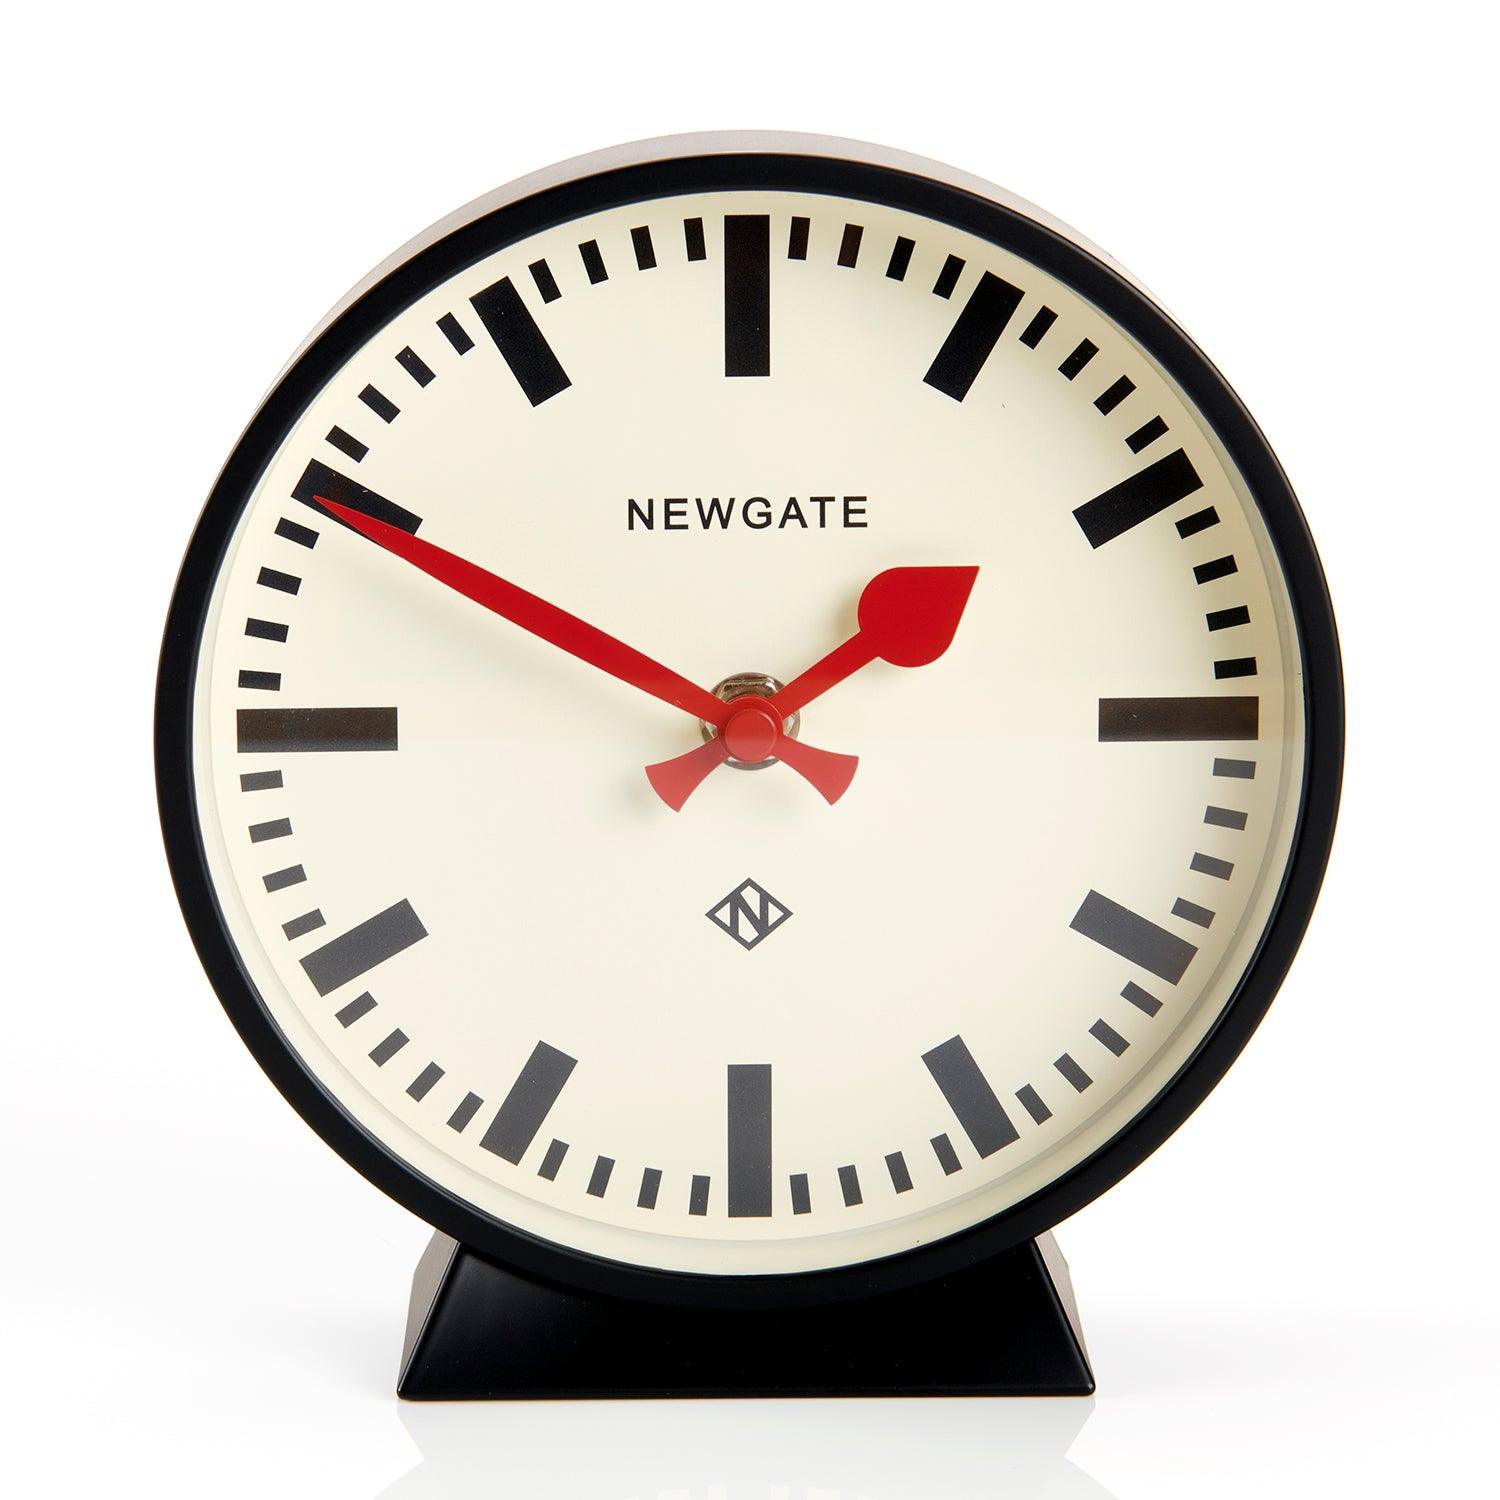 Black Mantel Railway Clock With Red Hands - Clocks/Watches - Science Museum Shop